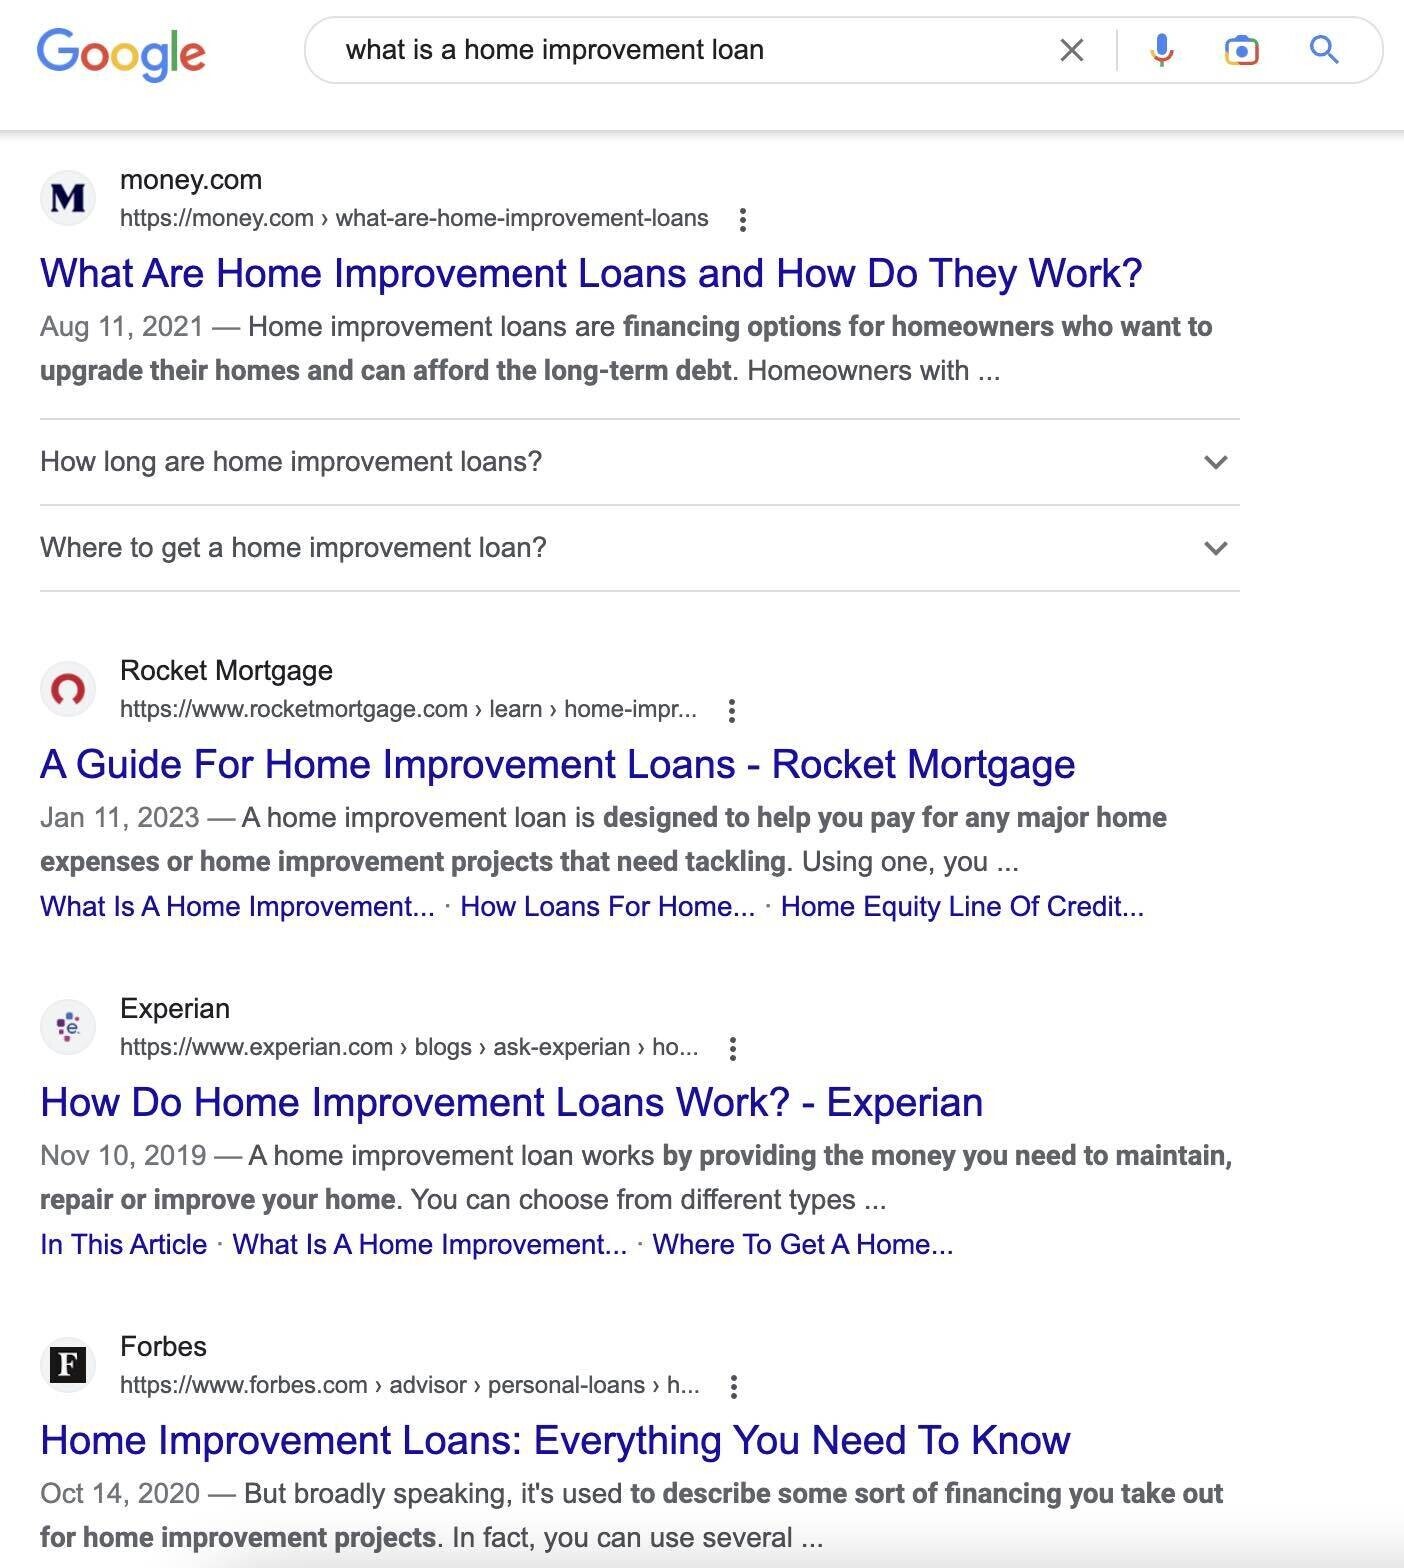 SERP results for what is a home improvement loan